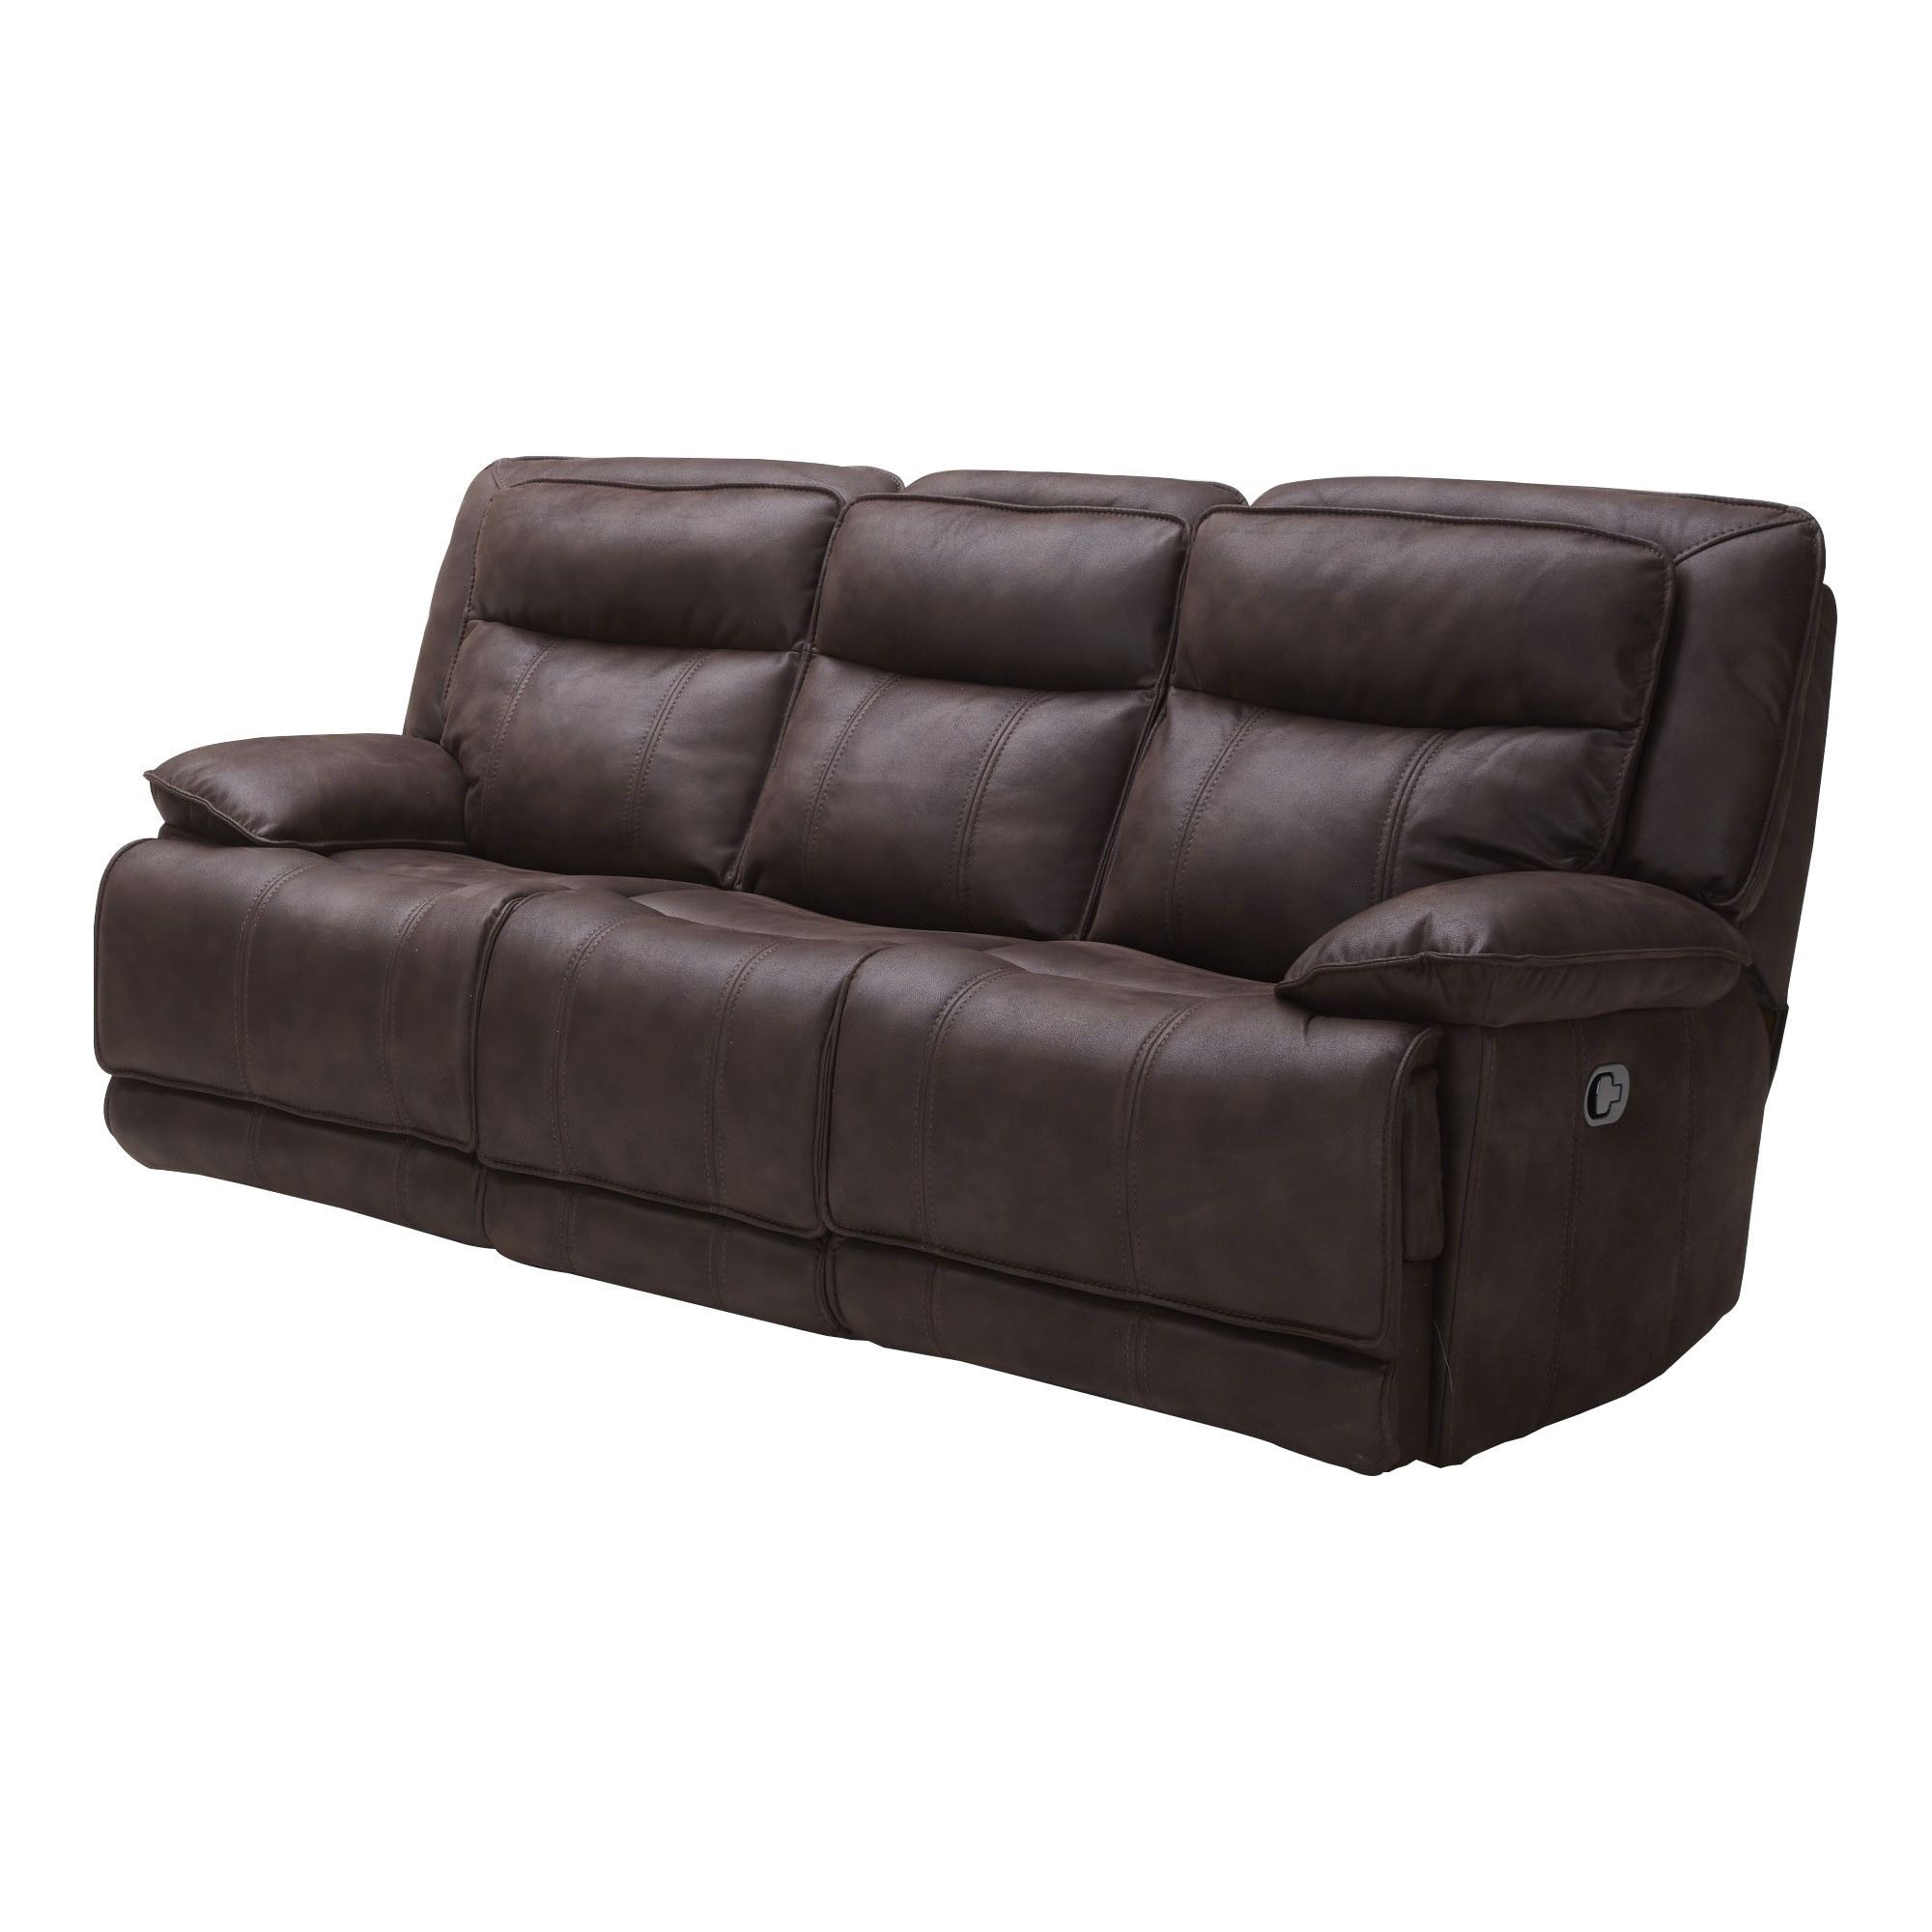 Abel Reclining Sofa  Espresso | Tepperman's Inside Teppermans Sectional Sofas (Photo 4 of 10)